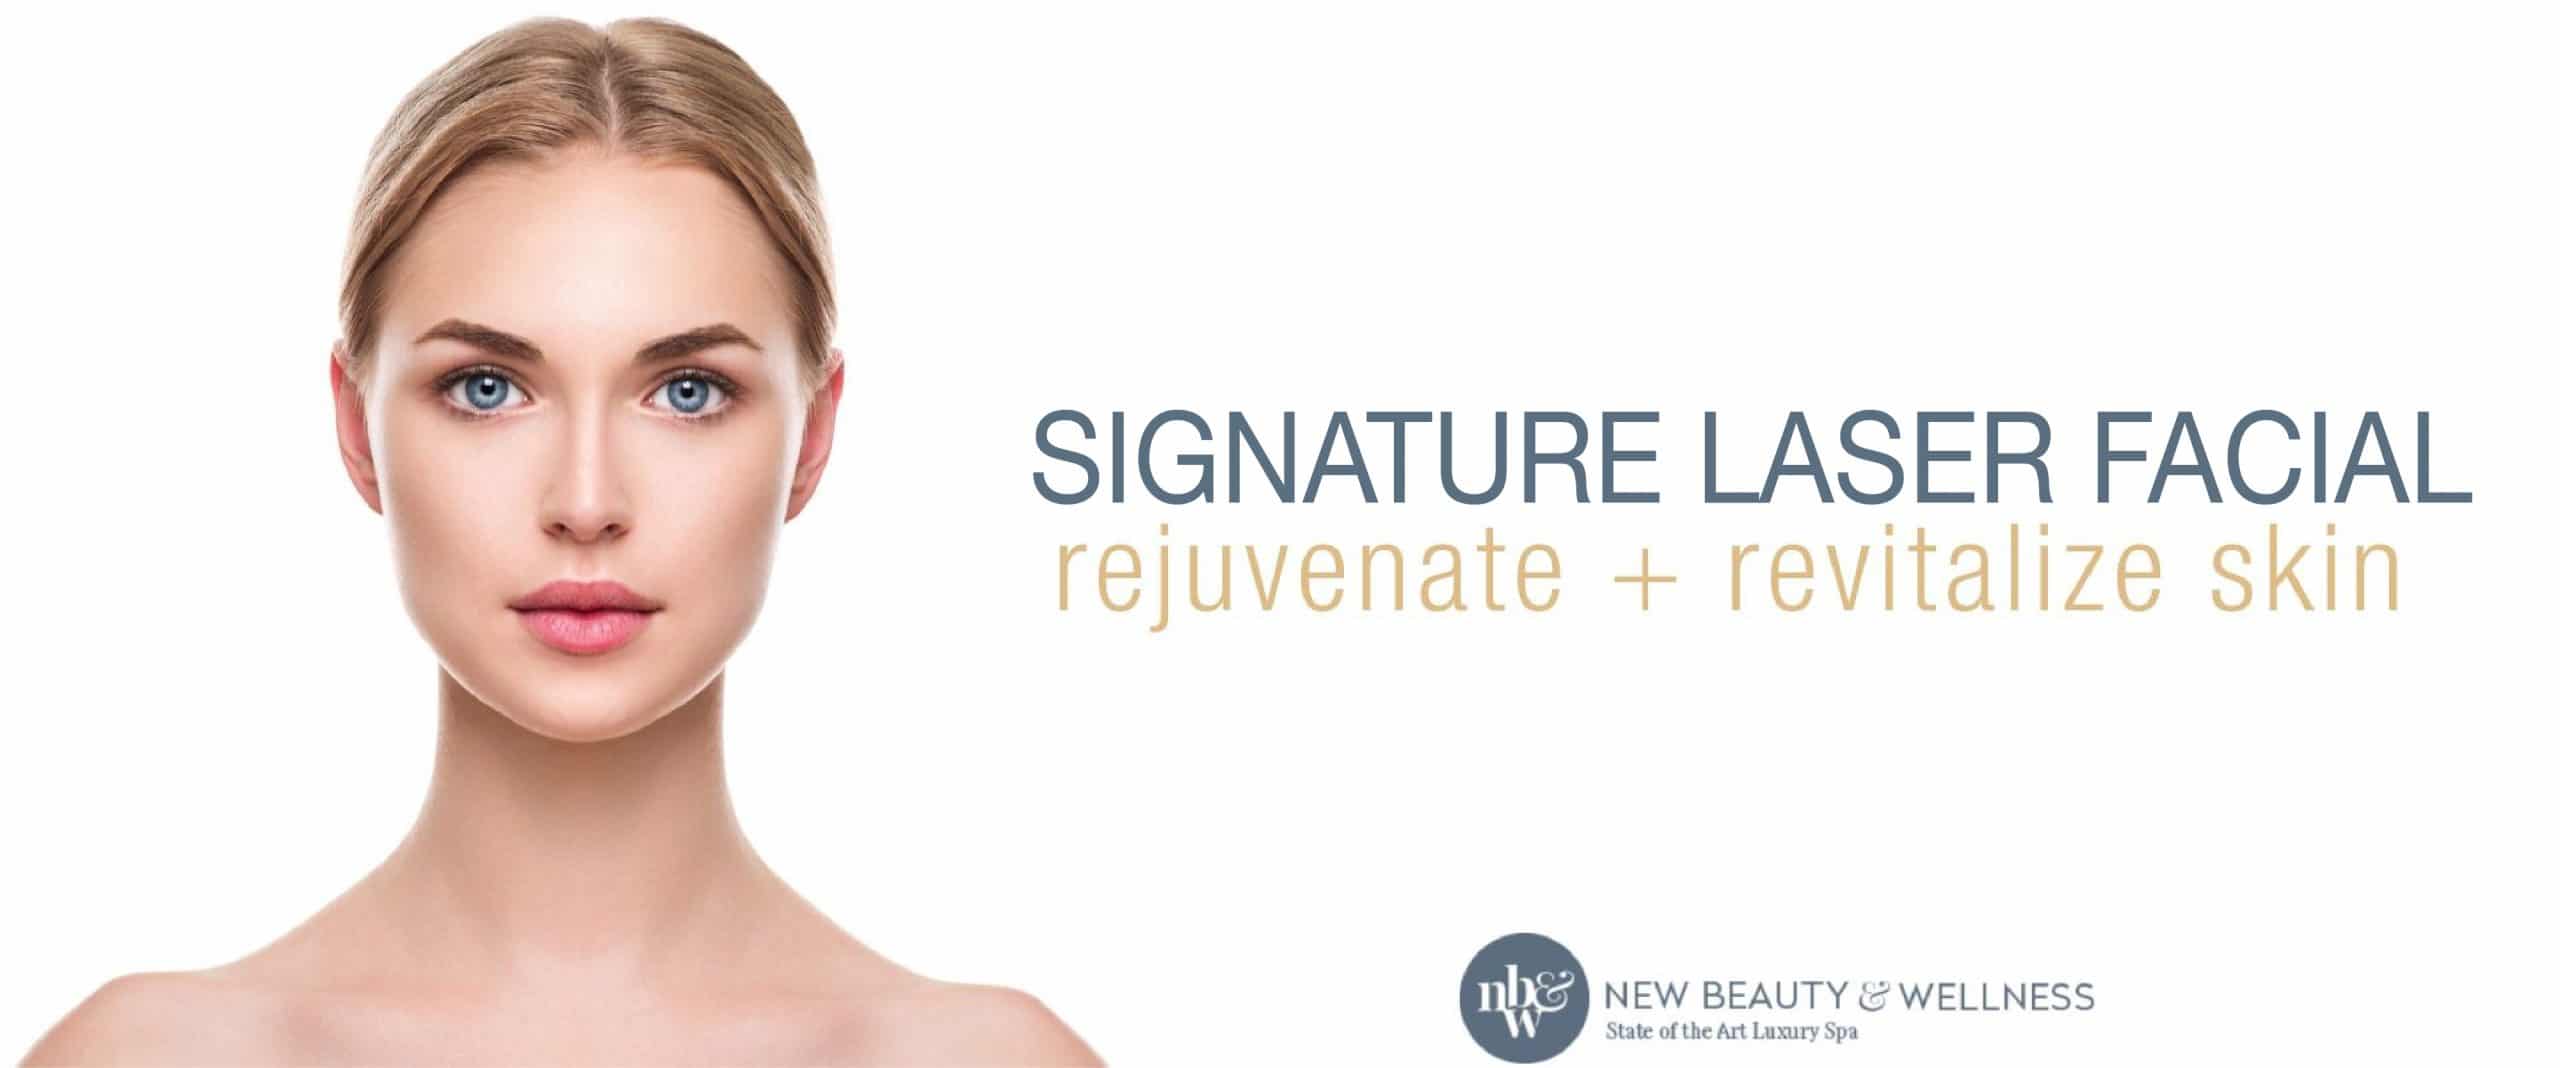 Woman with rejuvenated and revitalized skin after a signature laser facial treatment.